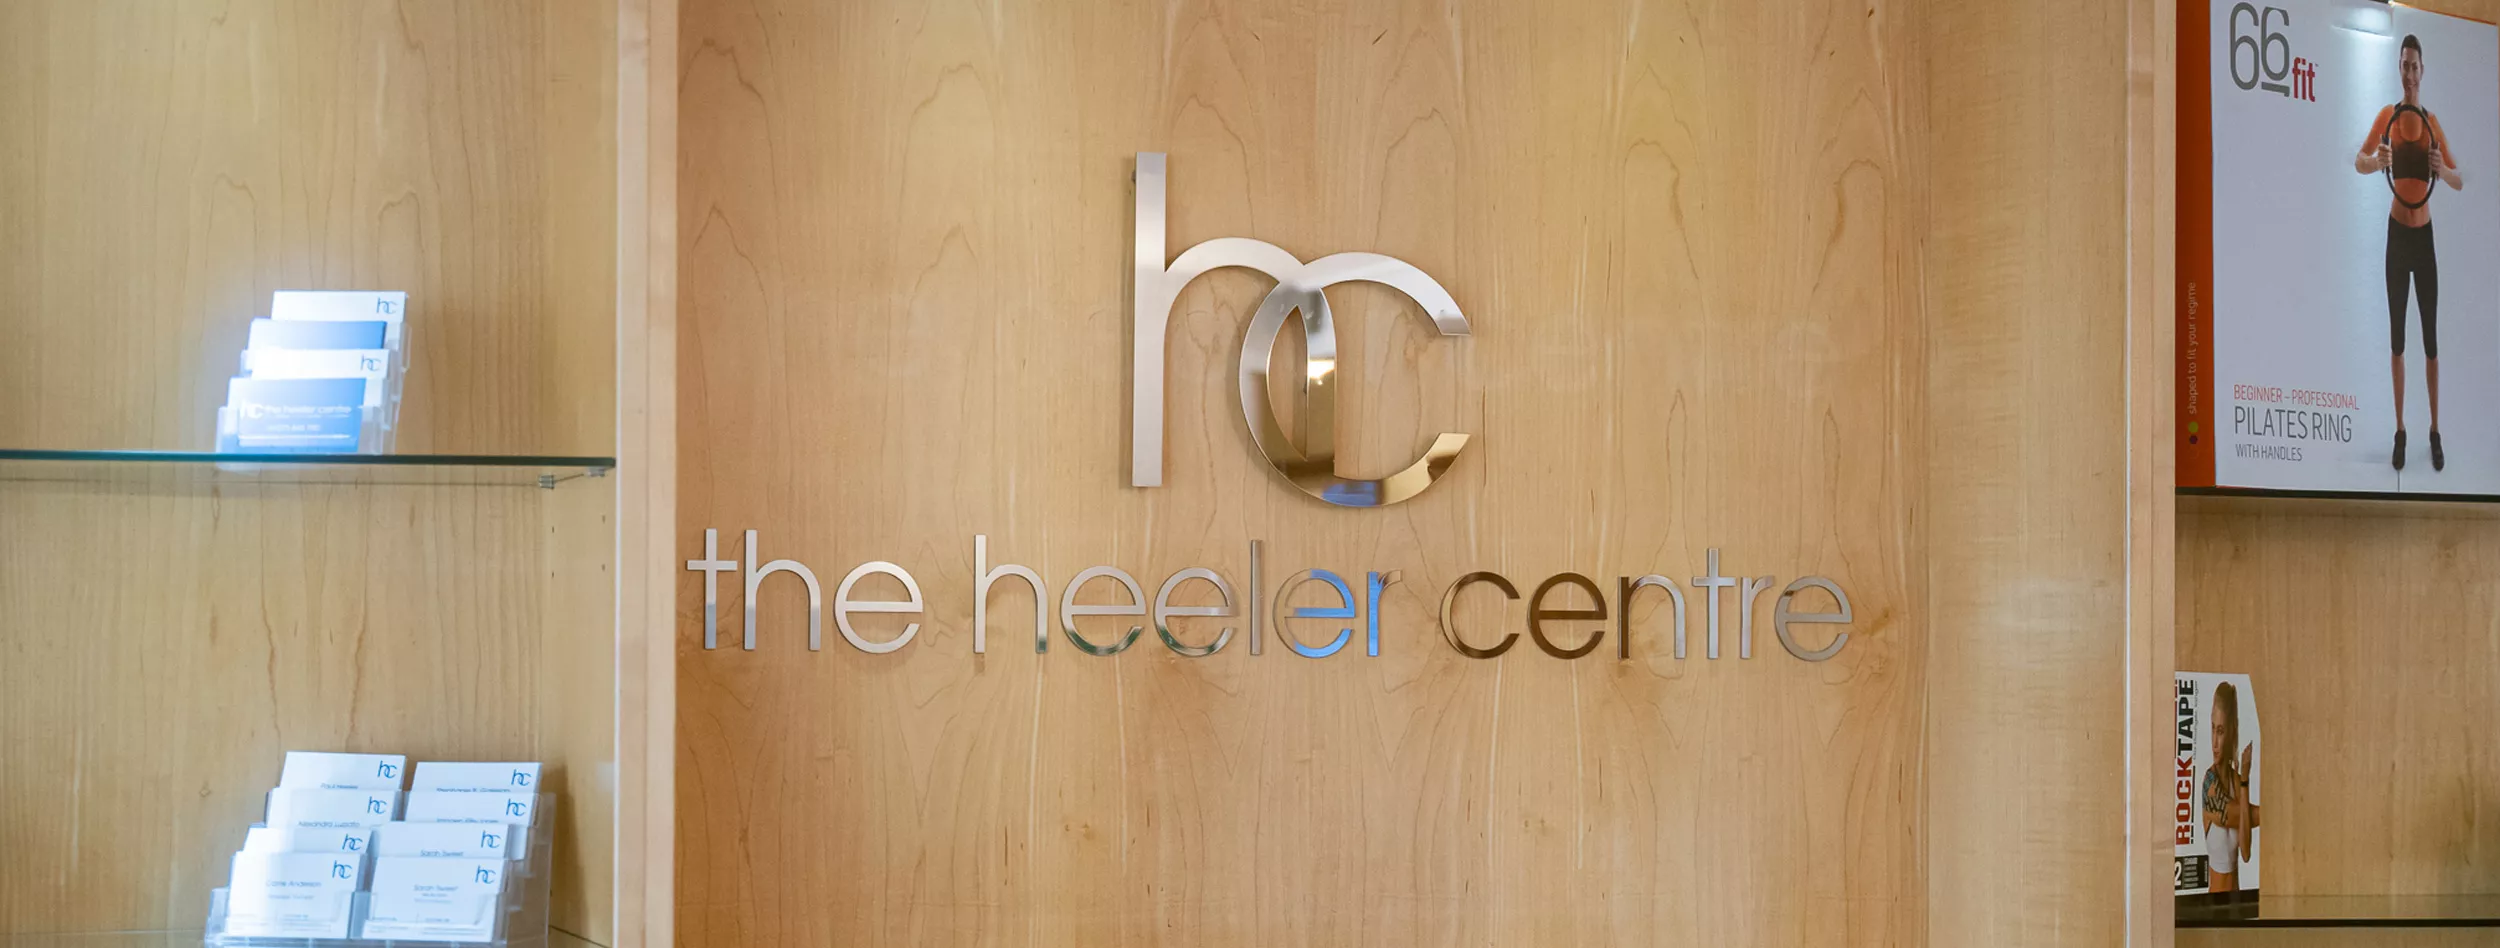 Welcome to the Heeler Centre, Physiotherapy, Osteopath, Hassocks